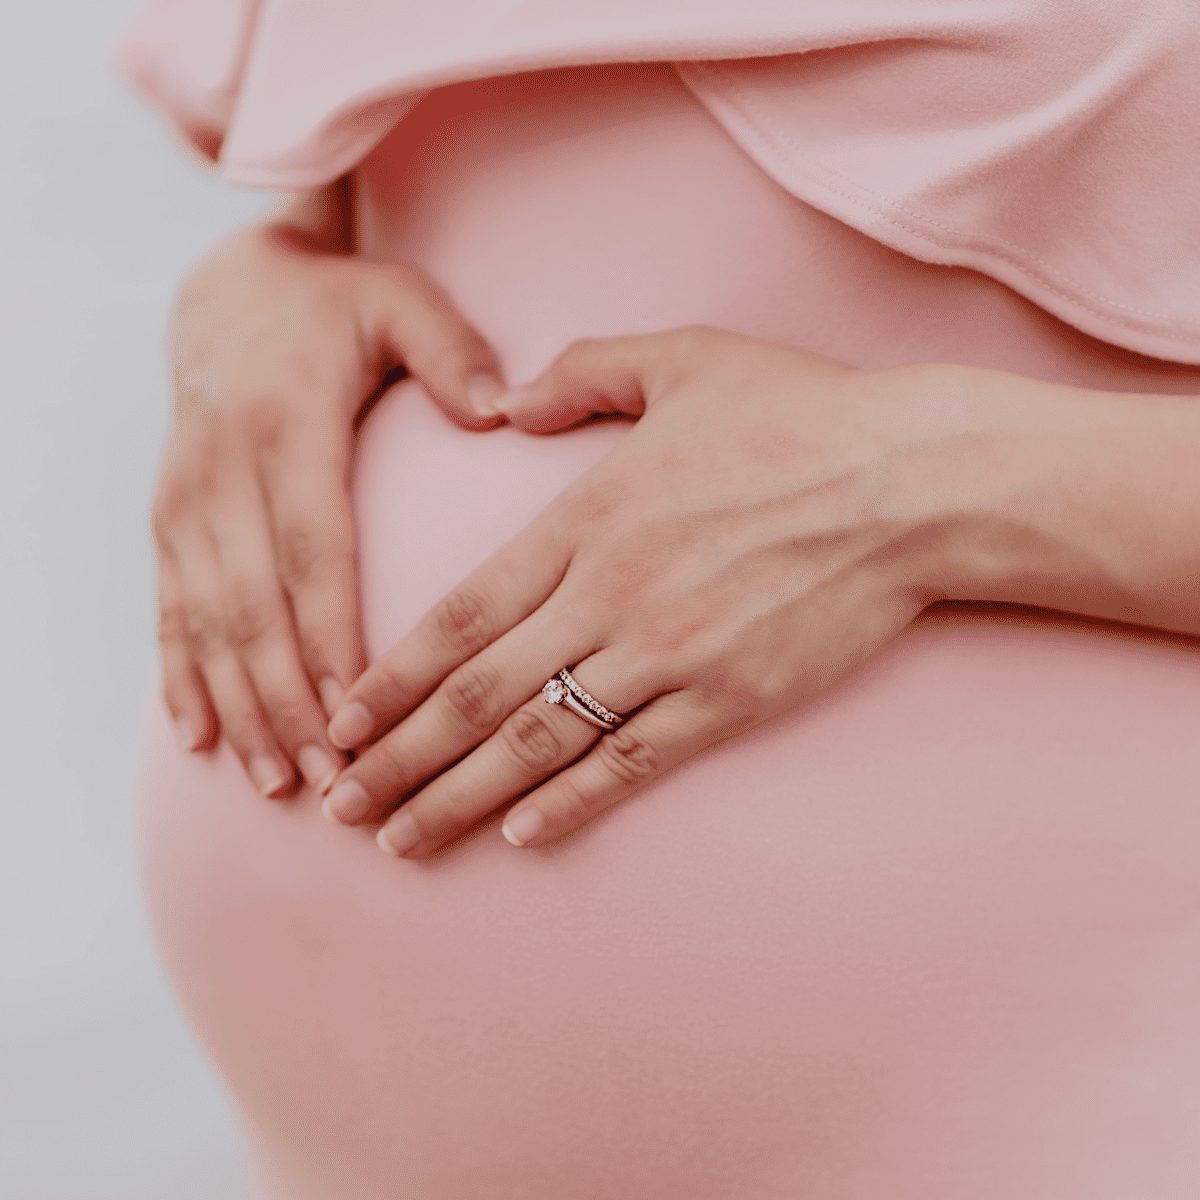 A Period While Pregnant? Causes of Vaginal Bleeding During Pregnancy -  WeHaveKids